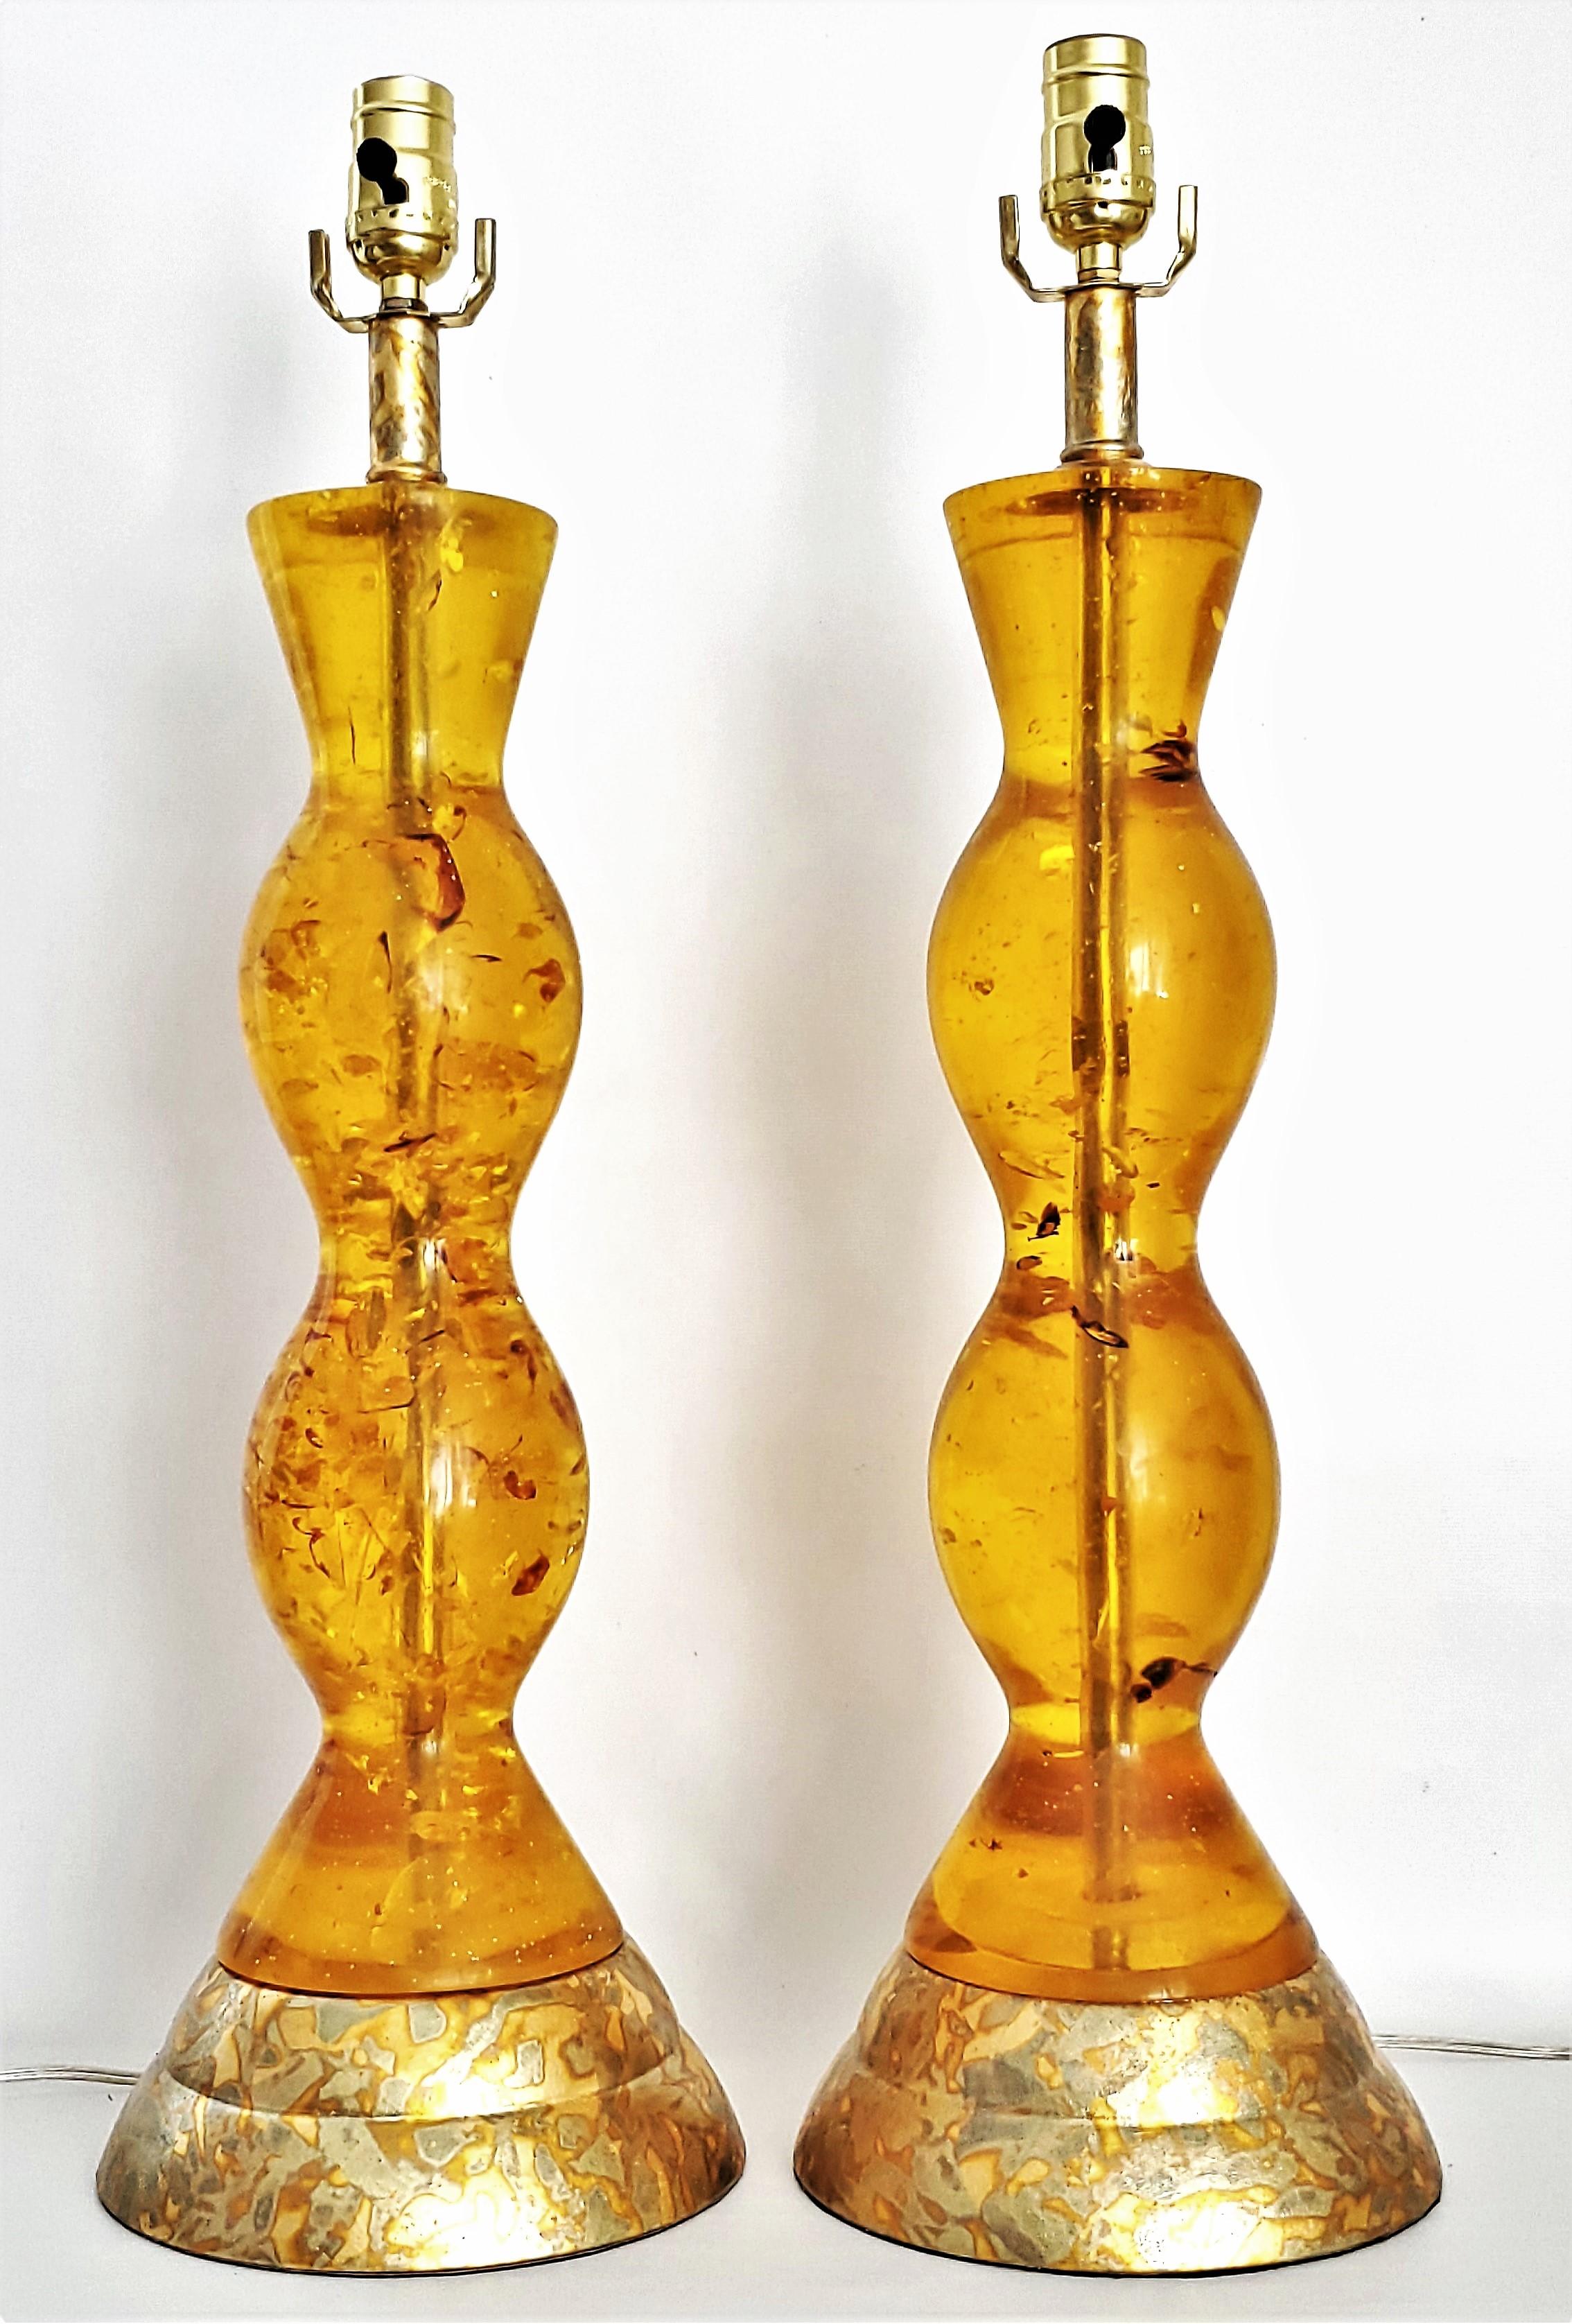 Offering a restored pair of tall amber colored Lucite and gold leafed table lamps, circa 1980.  These are a rare pair of Lucite lamps done in the style of French designer Pierre Giraudon. The Lucite is filled with darker amber colored inclusions